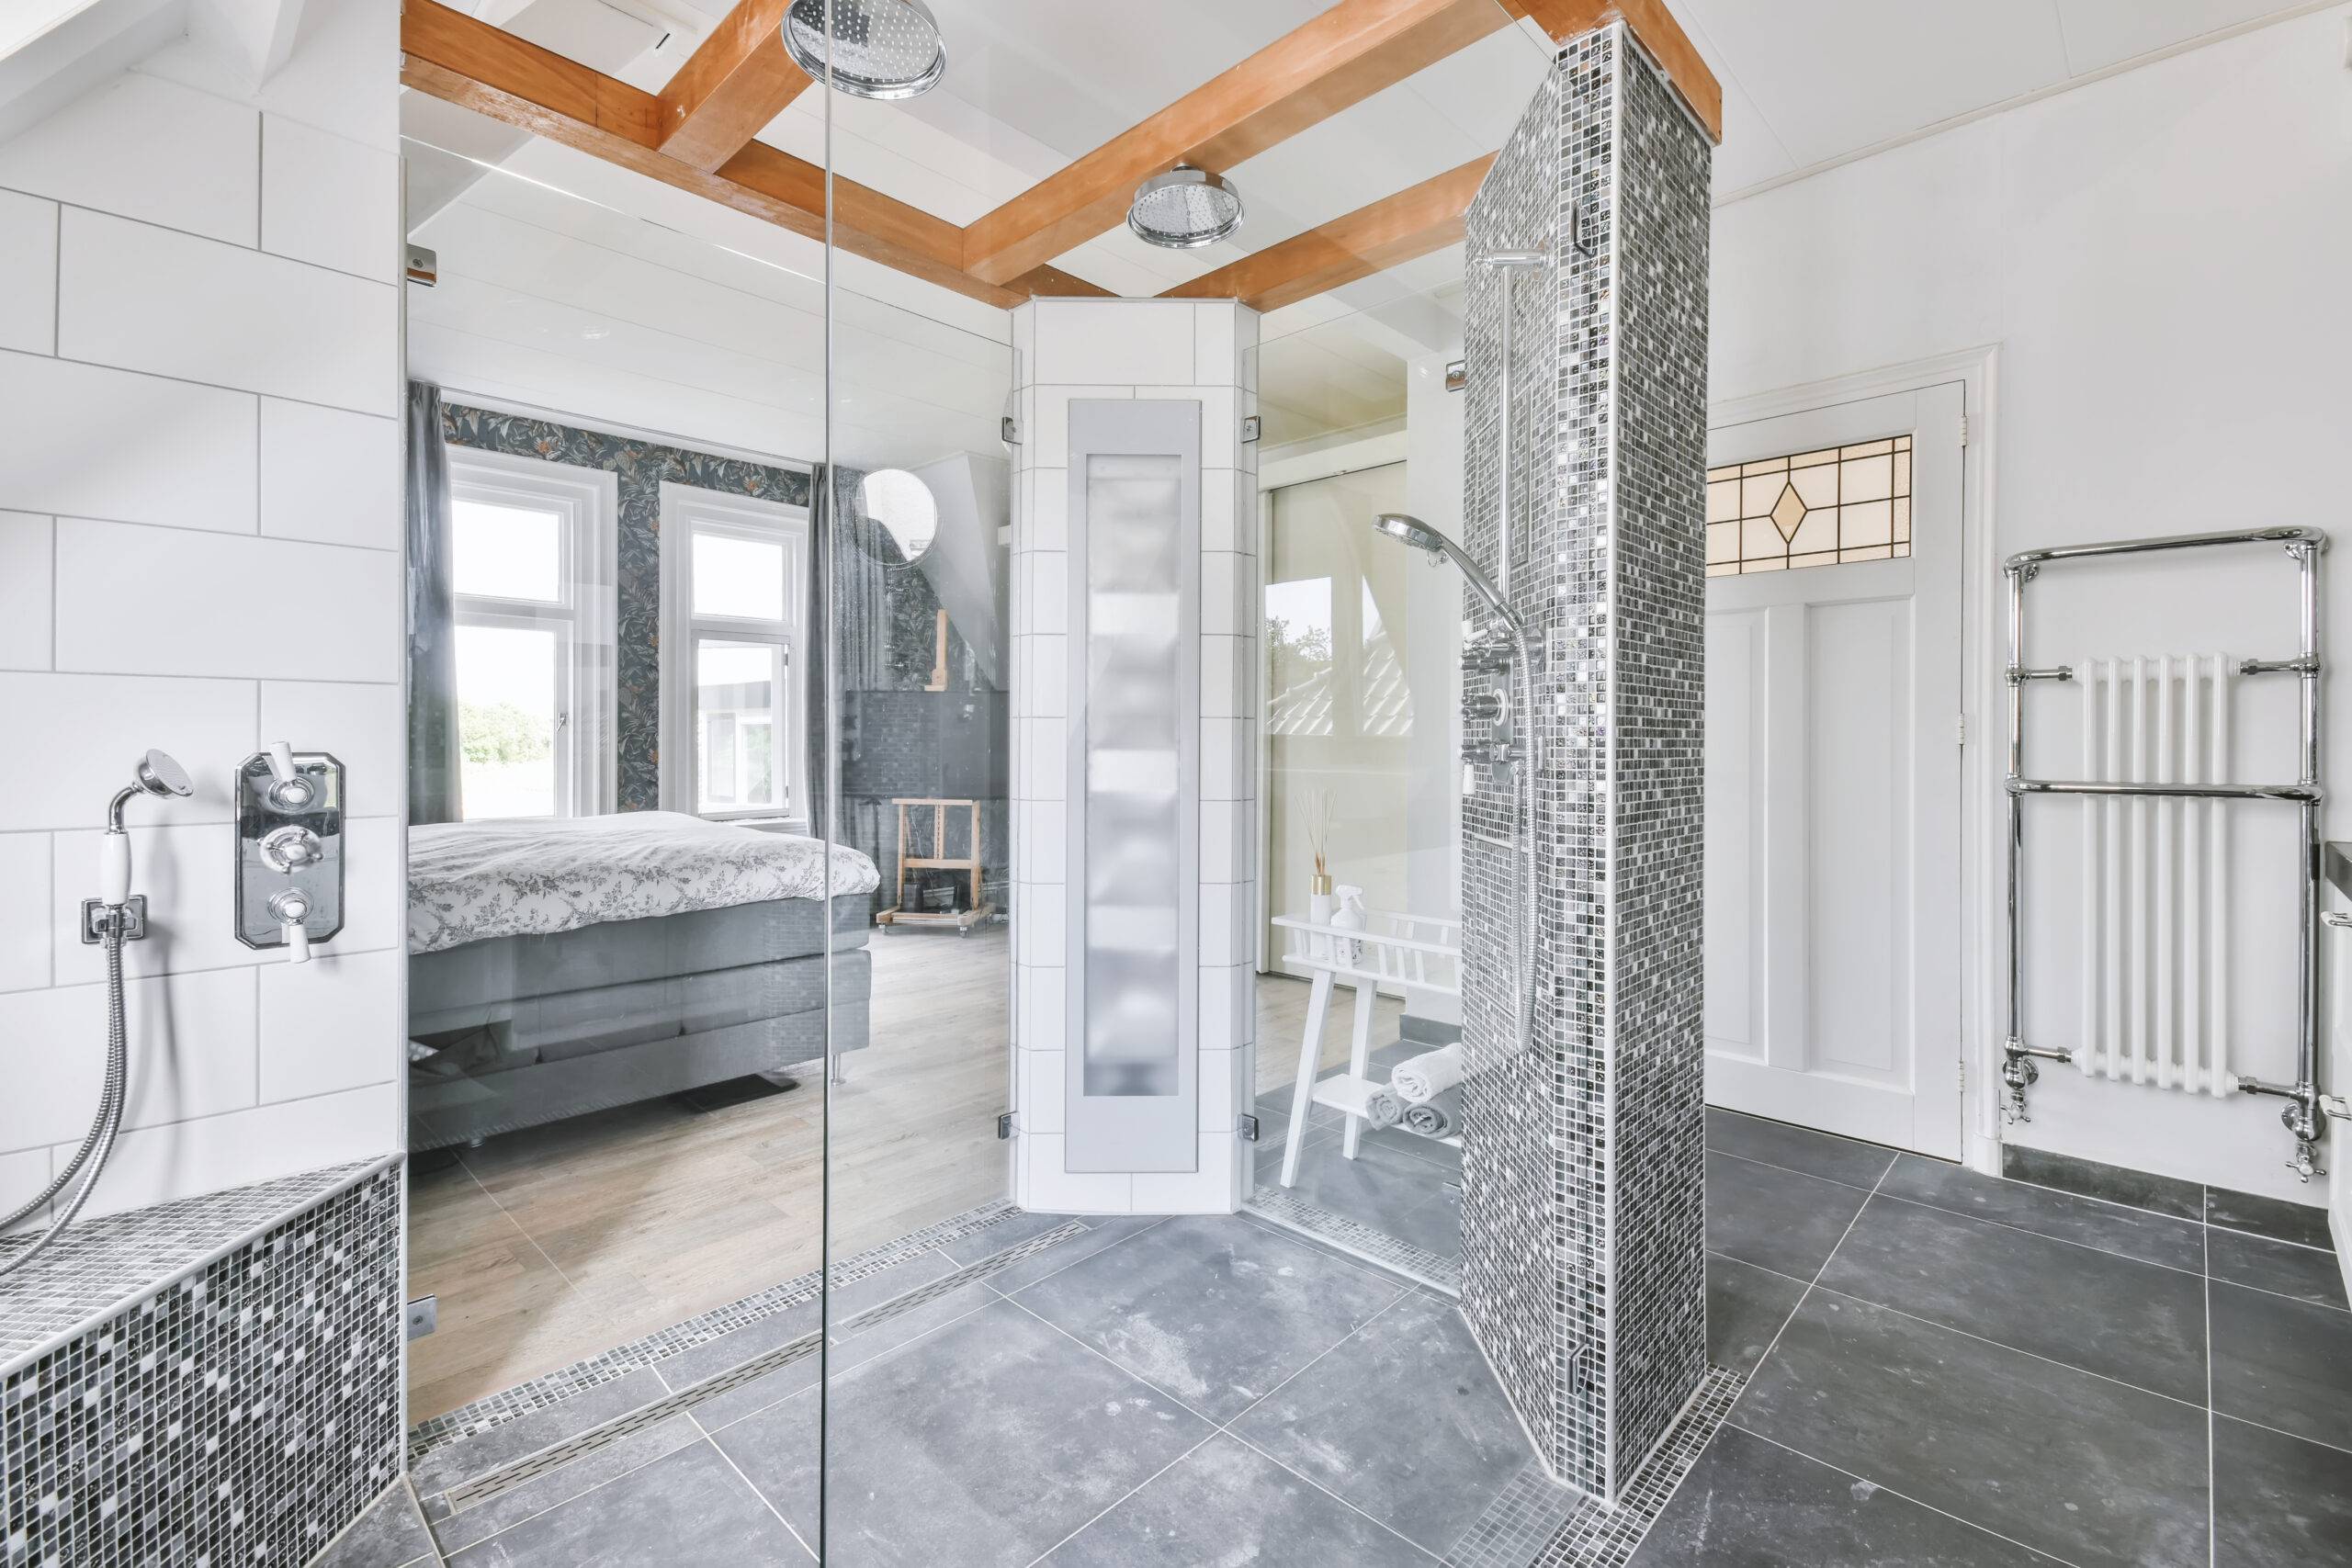 Shower room with glass doors leading to the bedroom